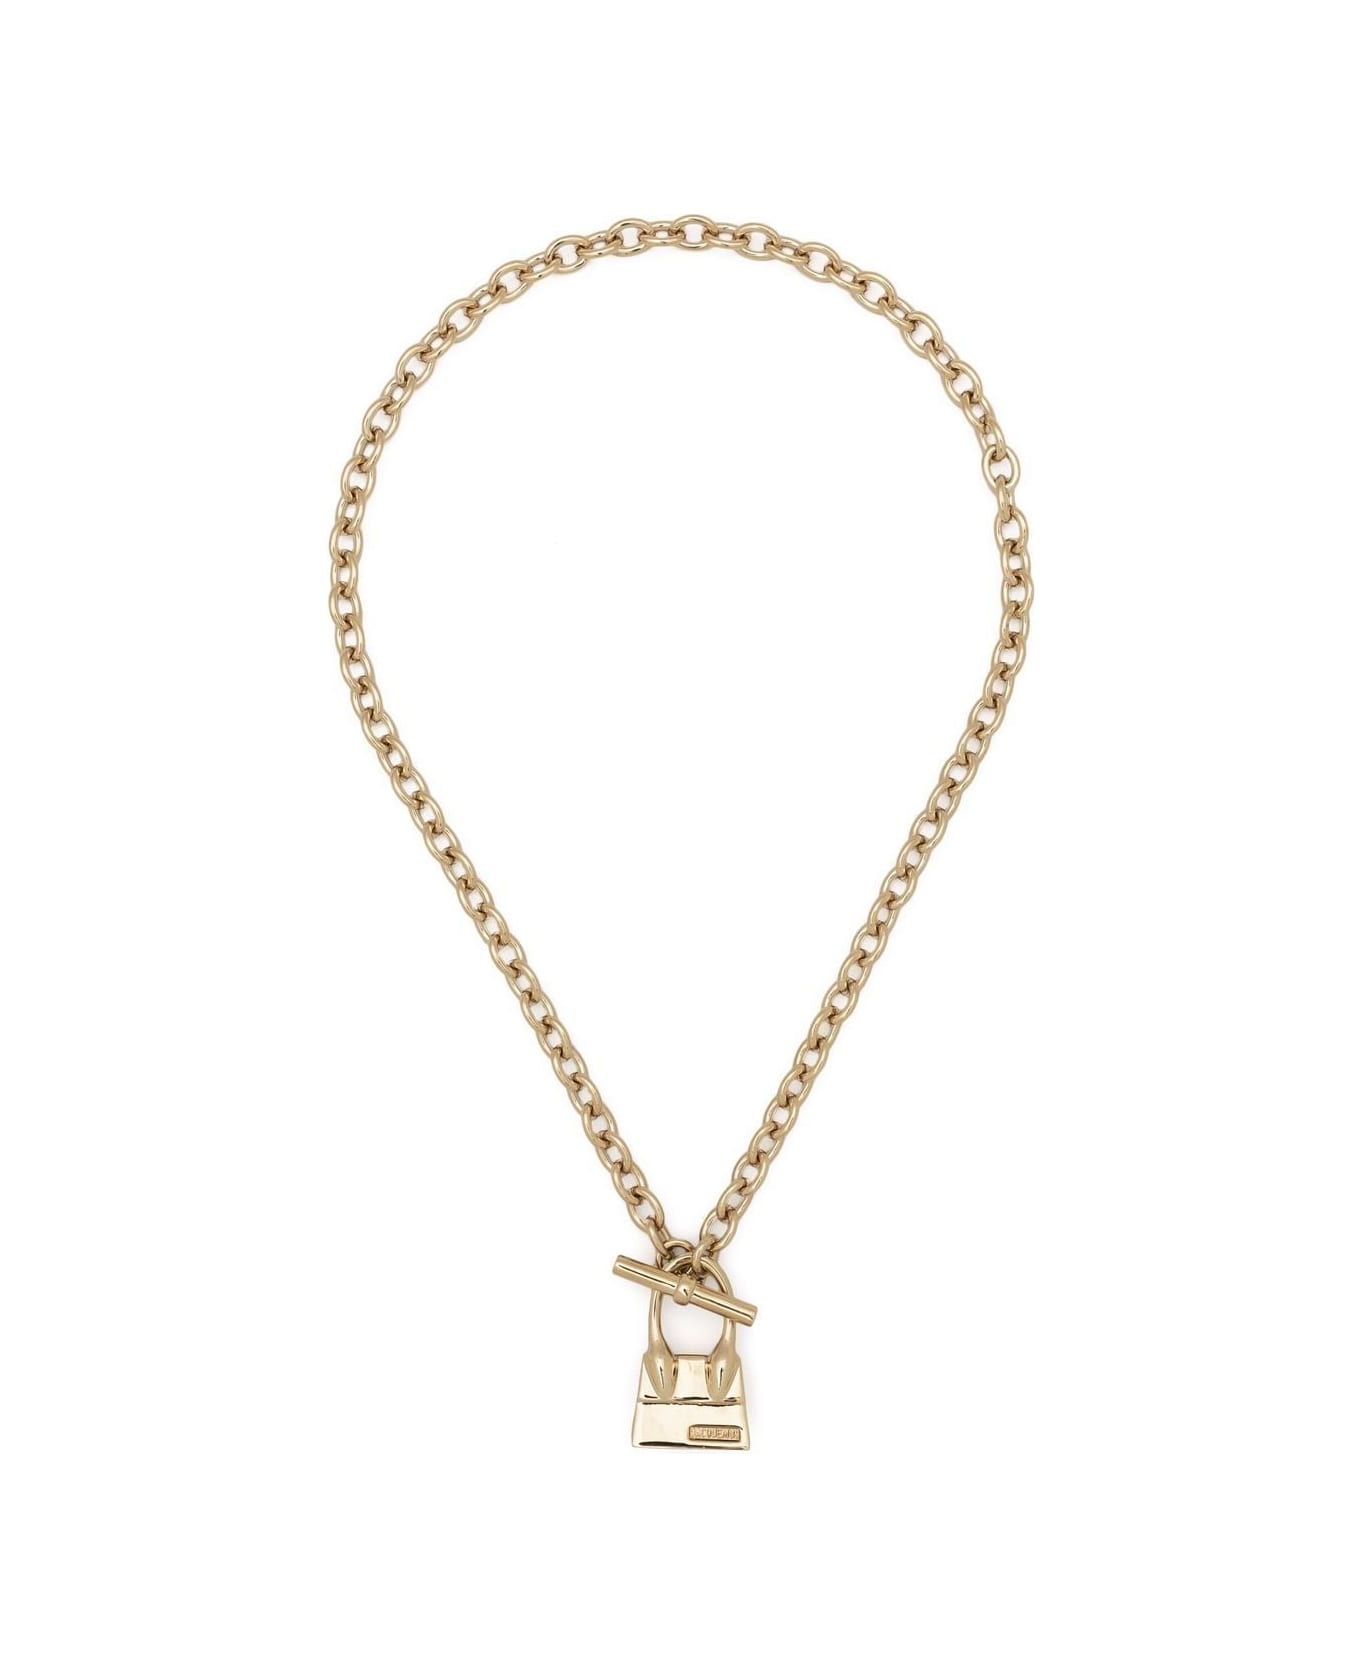 Jacquemus Le Collier Chiquito Barre - Light Gold ネックレス